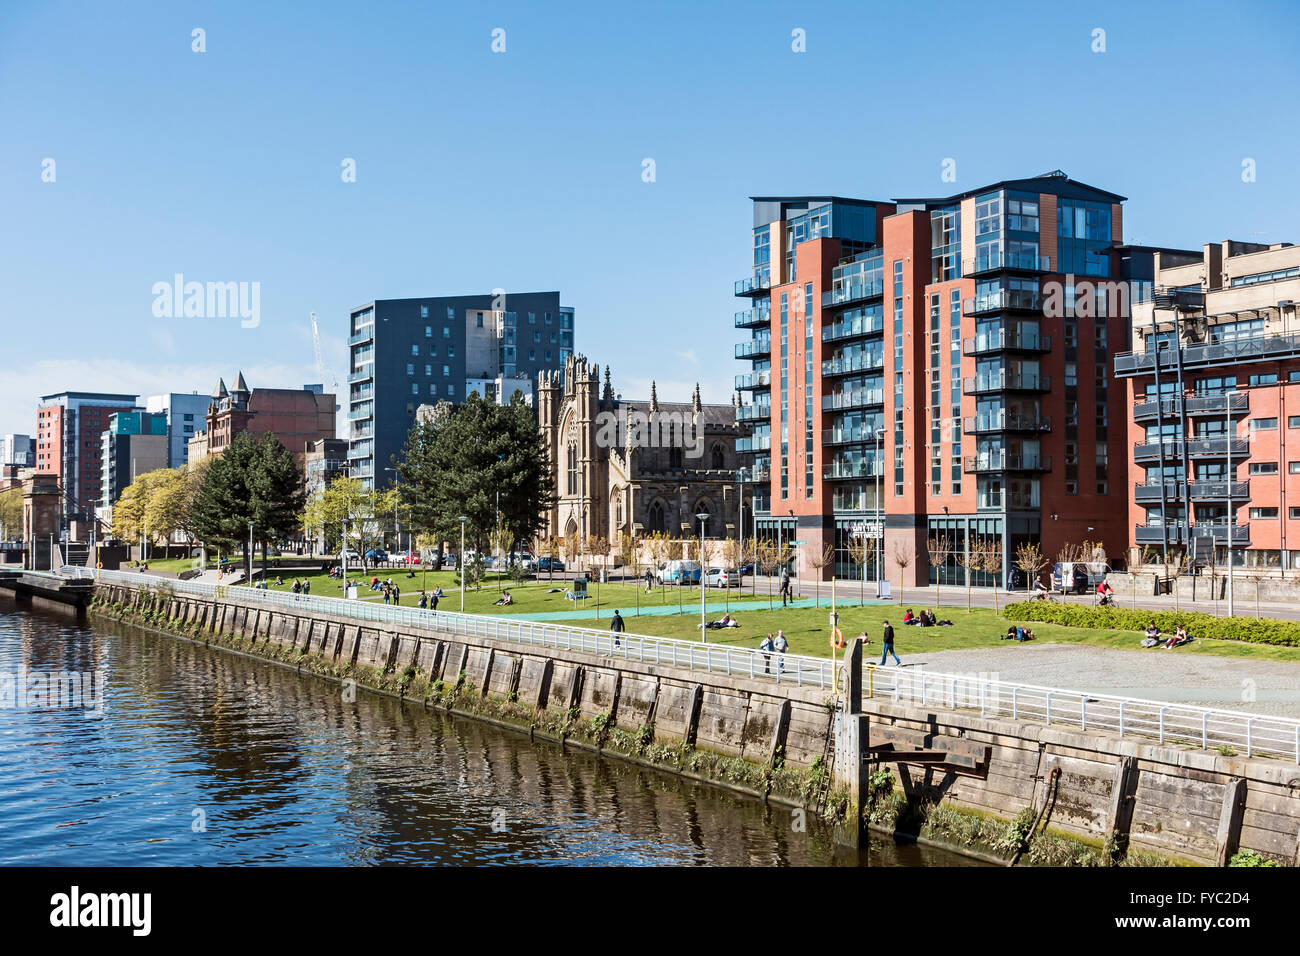 Line-up of buildings along Clyde Street at River Clyde in Glasgow Scotland with people enjoying the sun shine at midday Stock Photo